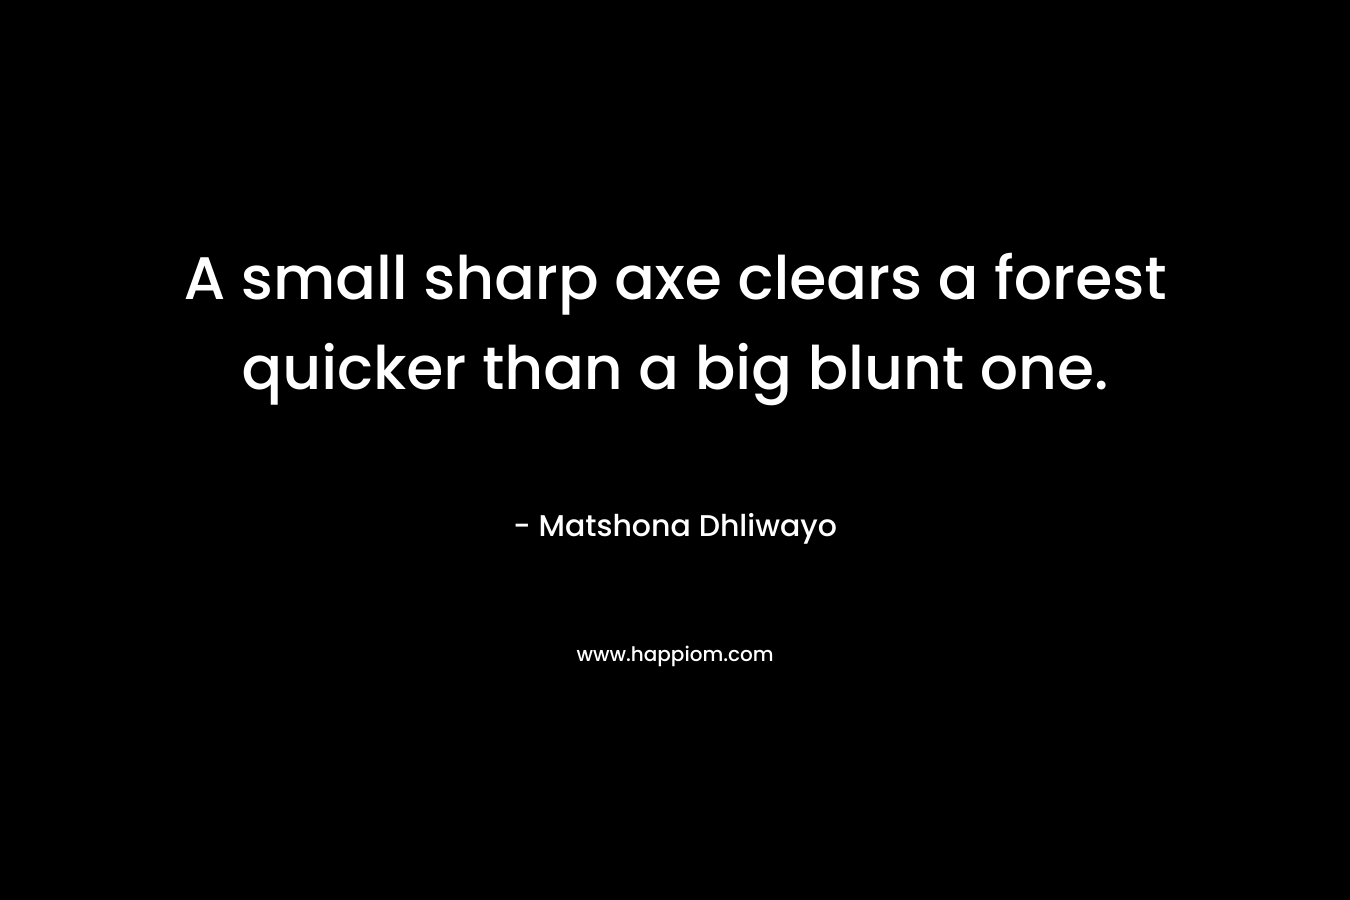 A small sharp axe clears a forest quicker than a big blunt one. – Matshona Dhliwayo